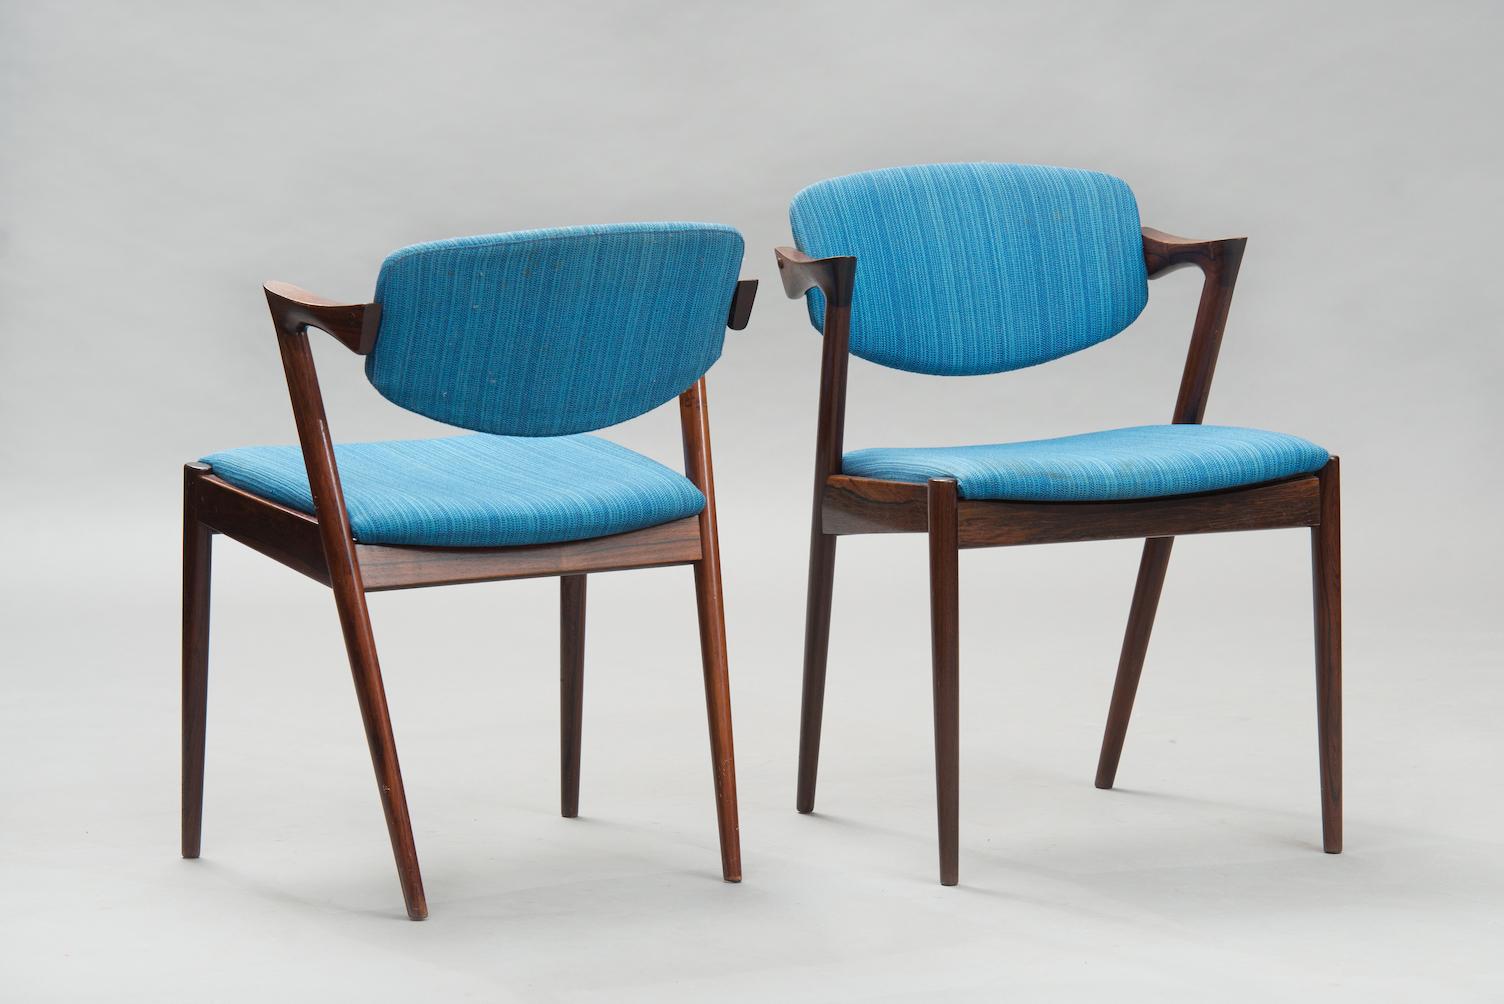 Set of 6 rosewood dining chairs model 42 with movable backrests, upholstered in the original blue fabric.
These items are in original condition, can be sold as they are or fully restored, the price shown is in original condition.